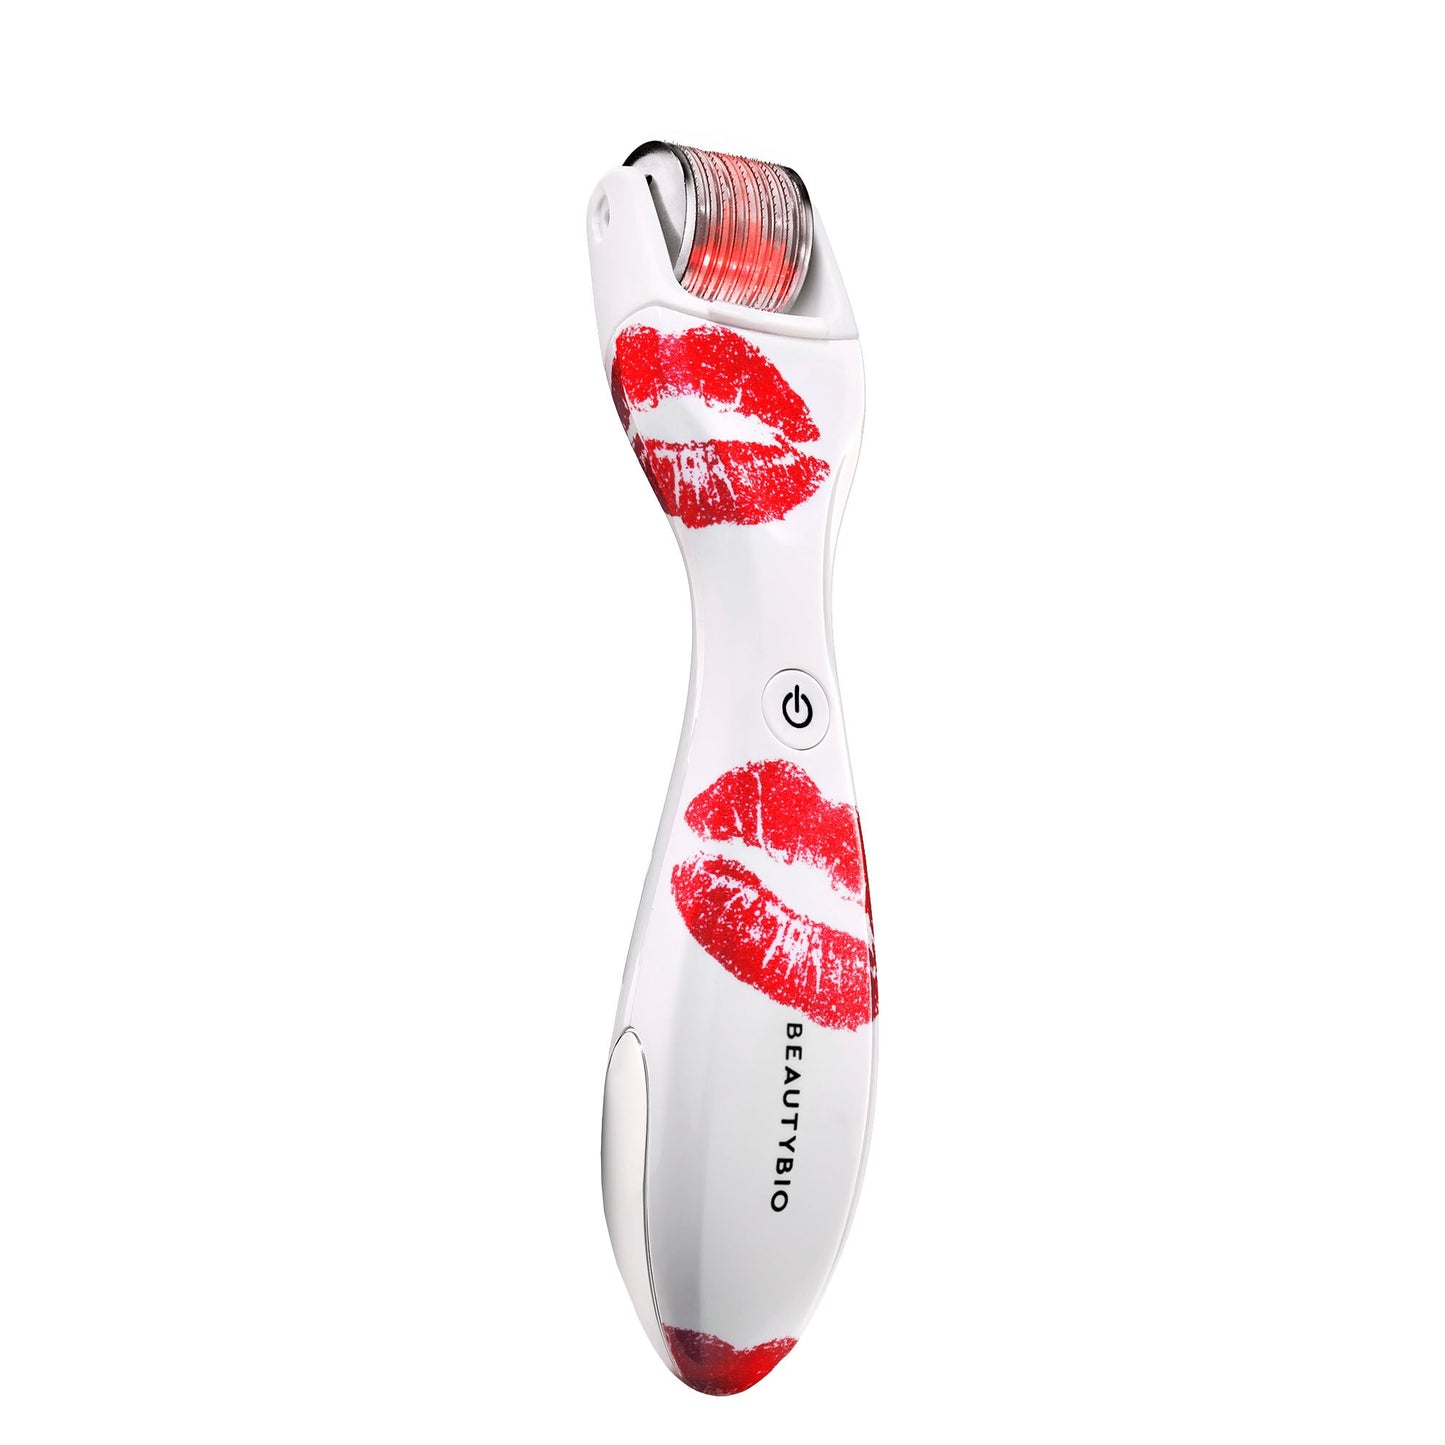 GloPRO® At-Home Microneedling Tool GloPRO BeautyBio Red Kisses 